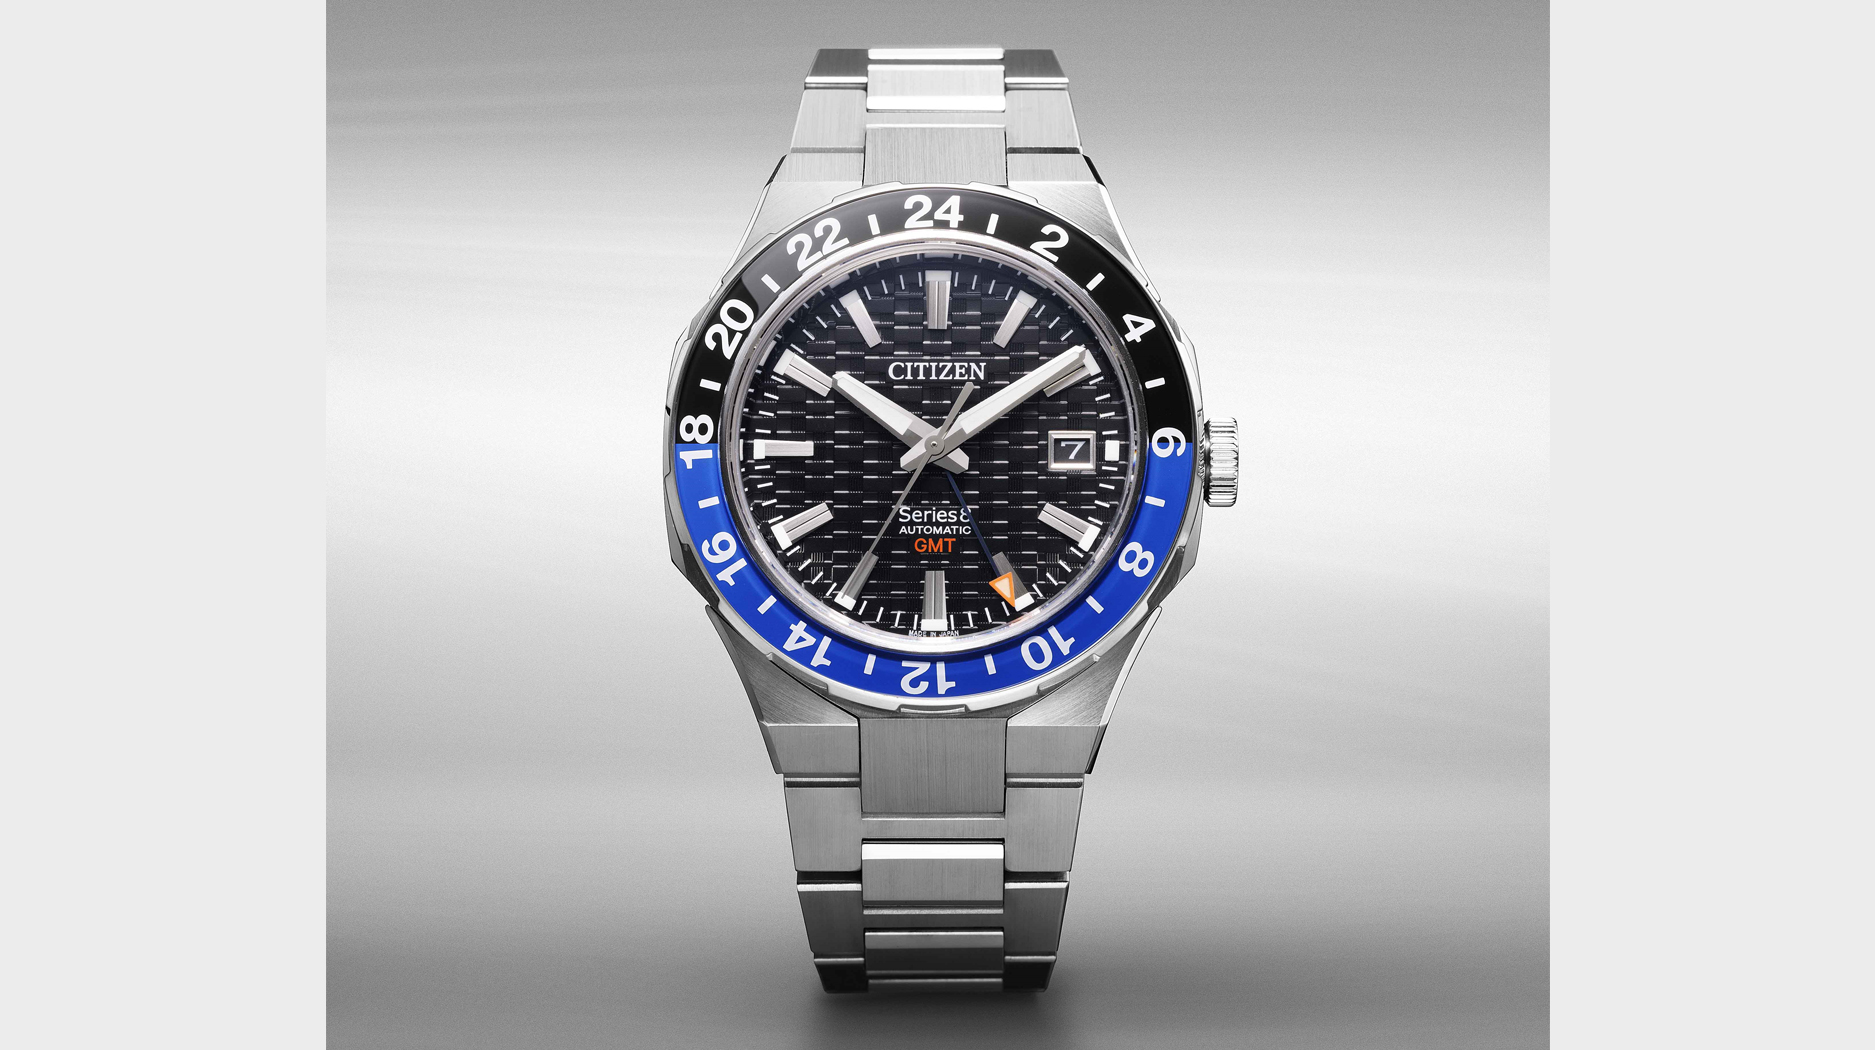 Citizen Introduces New Series 8 GMT Mechanical Watches | National 